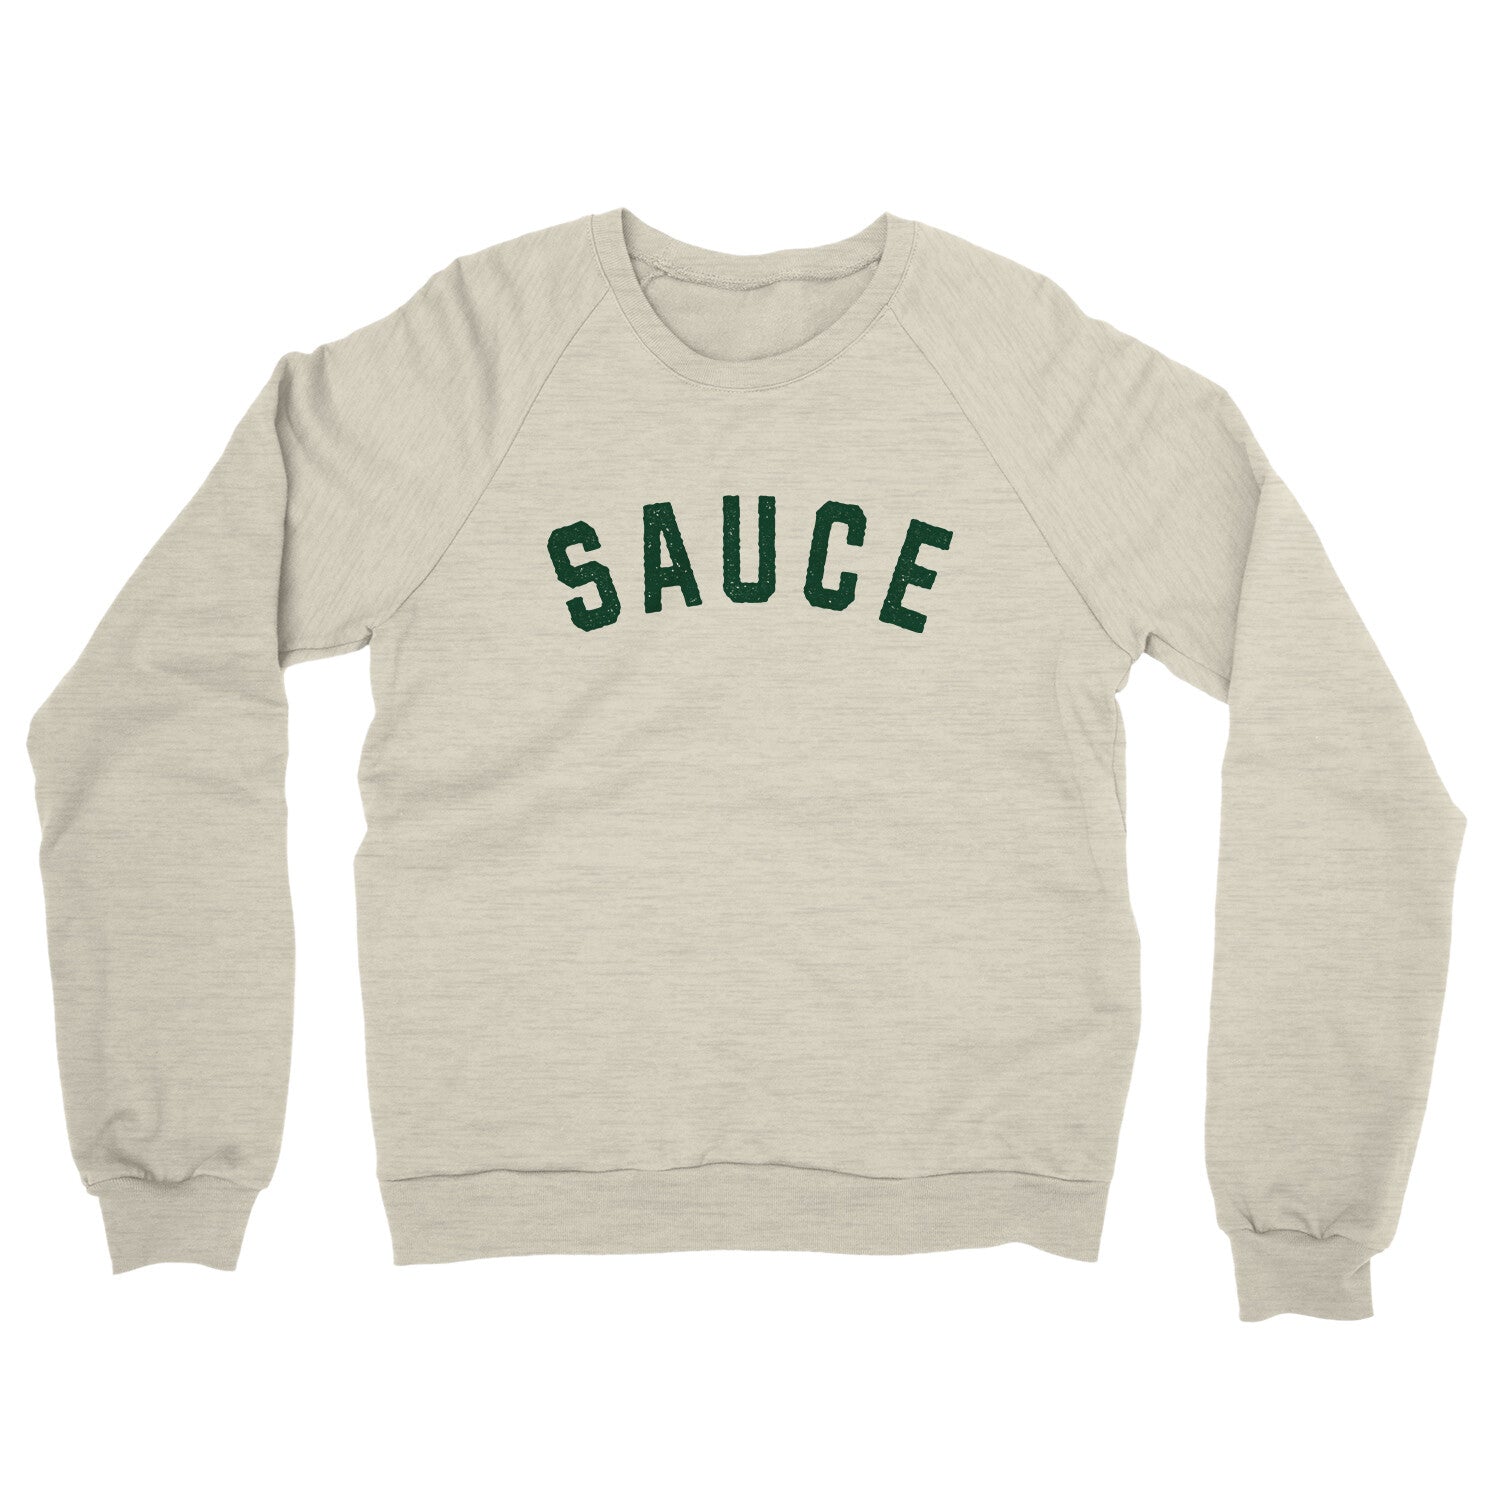 Sauce in Heather Oatmeal Color